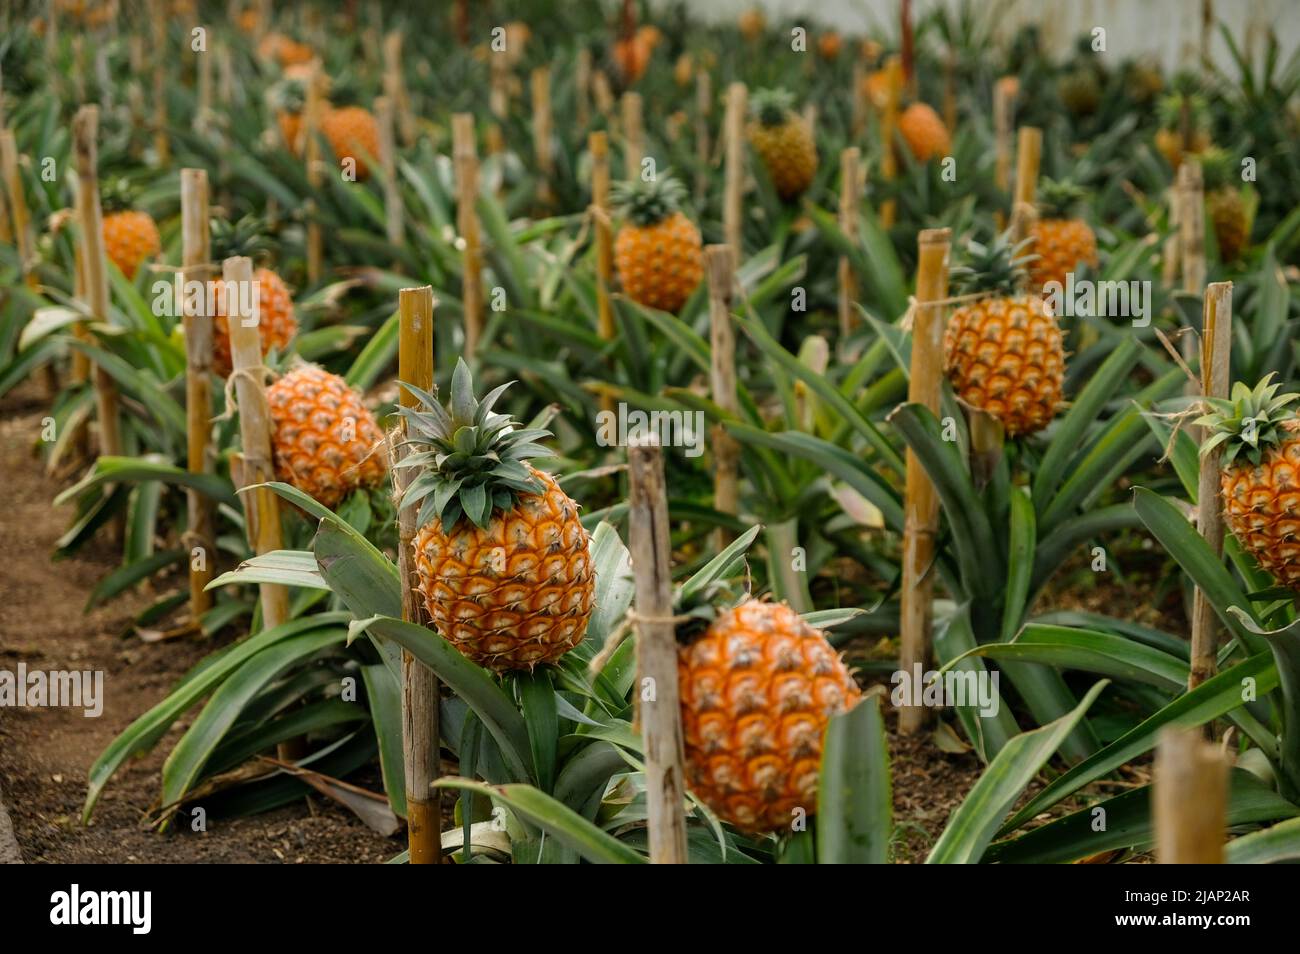 Traditional Azorean greenhouse Pineapple Plantation.  One Pineapple fruit in selective focus. São Miguel Island in the archipelago of Azores. Stock Photo